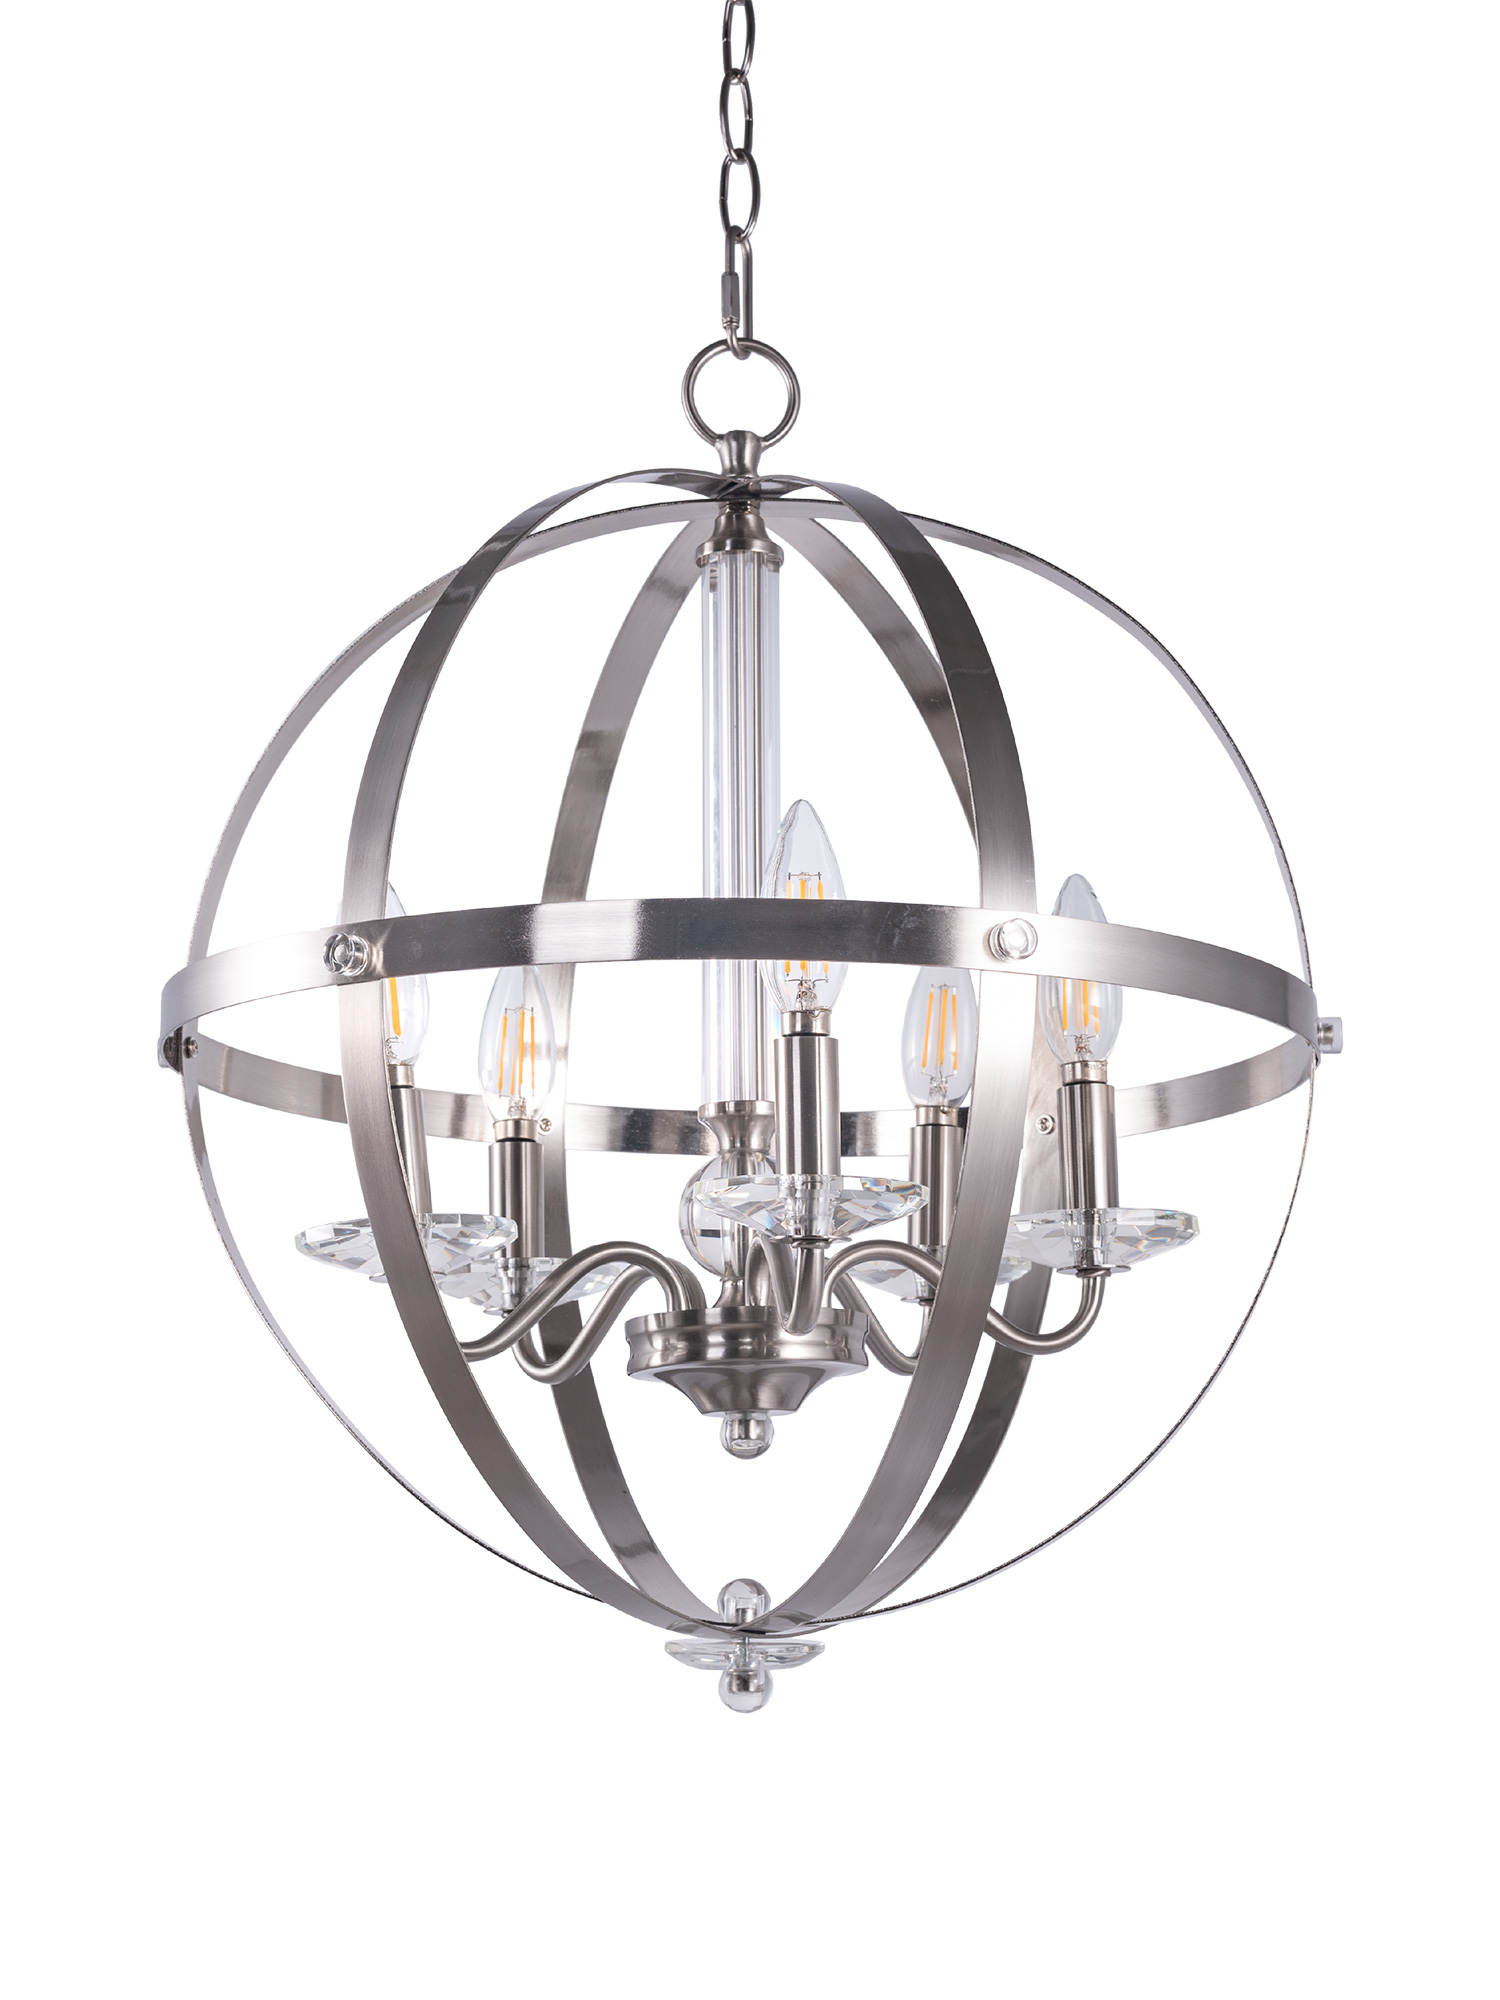 USA-Direct-5-Light-Candle-Style-Globe-Chandelier-Industrial-Rustic-Indoor-Pendant-Light-Without-Bulb-1877125-5